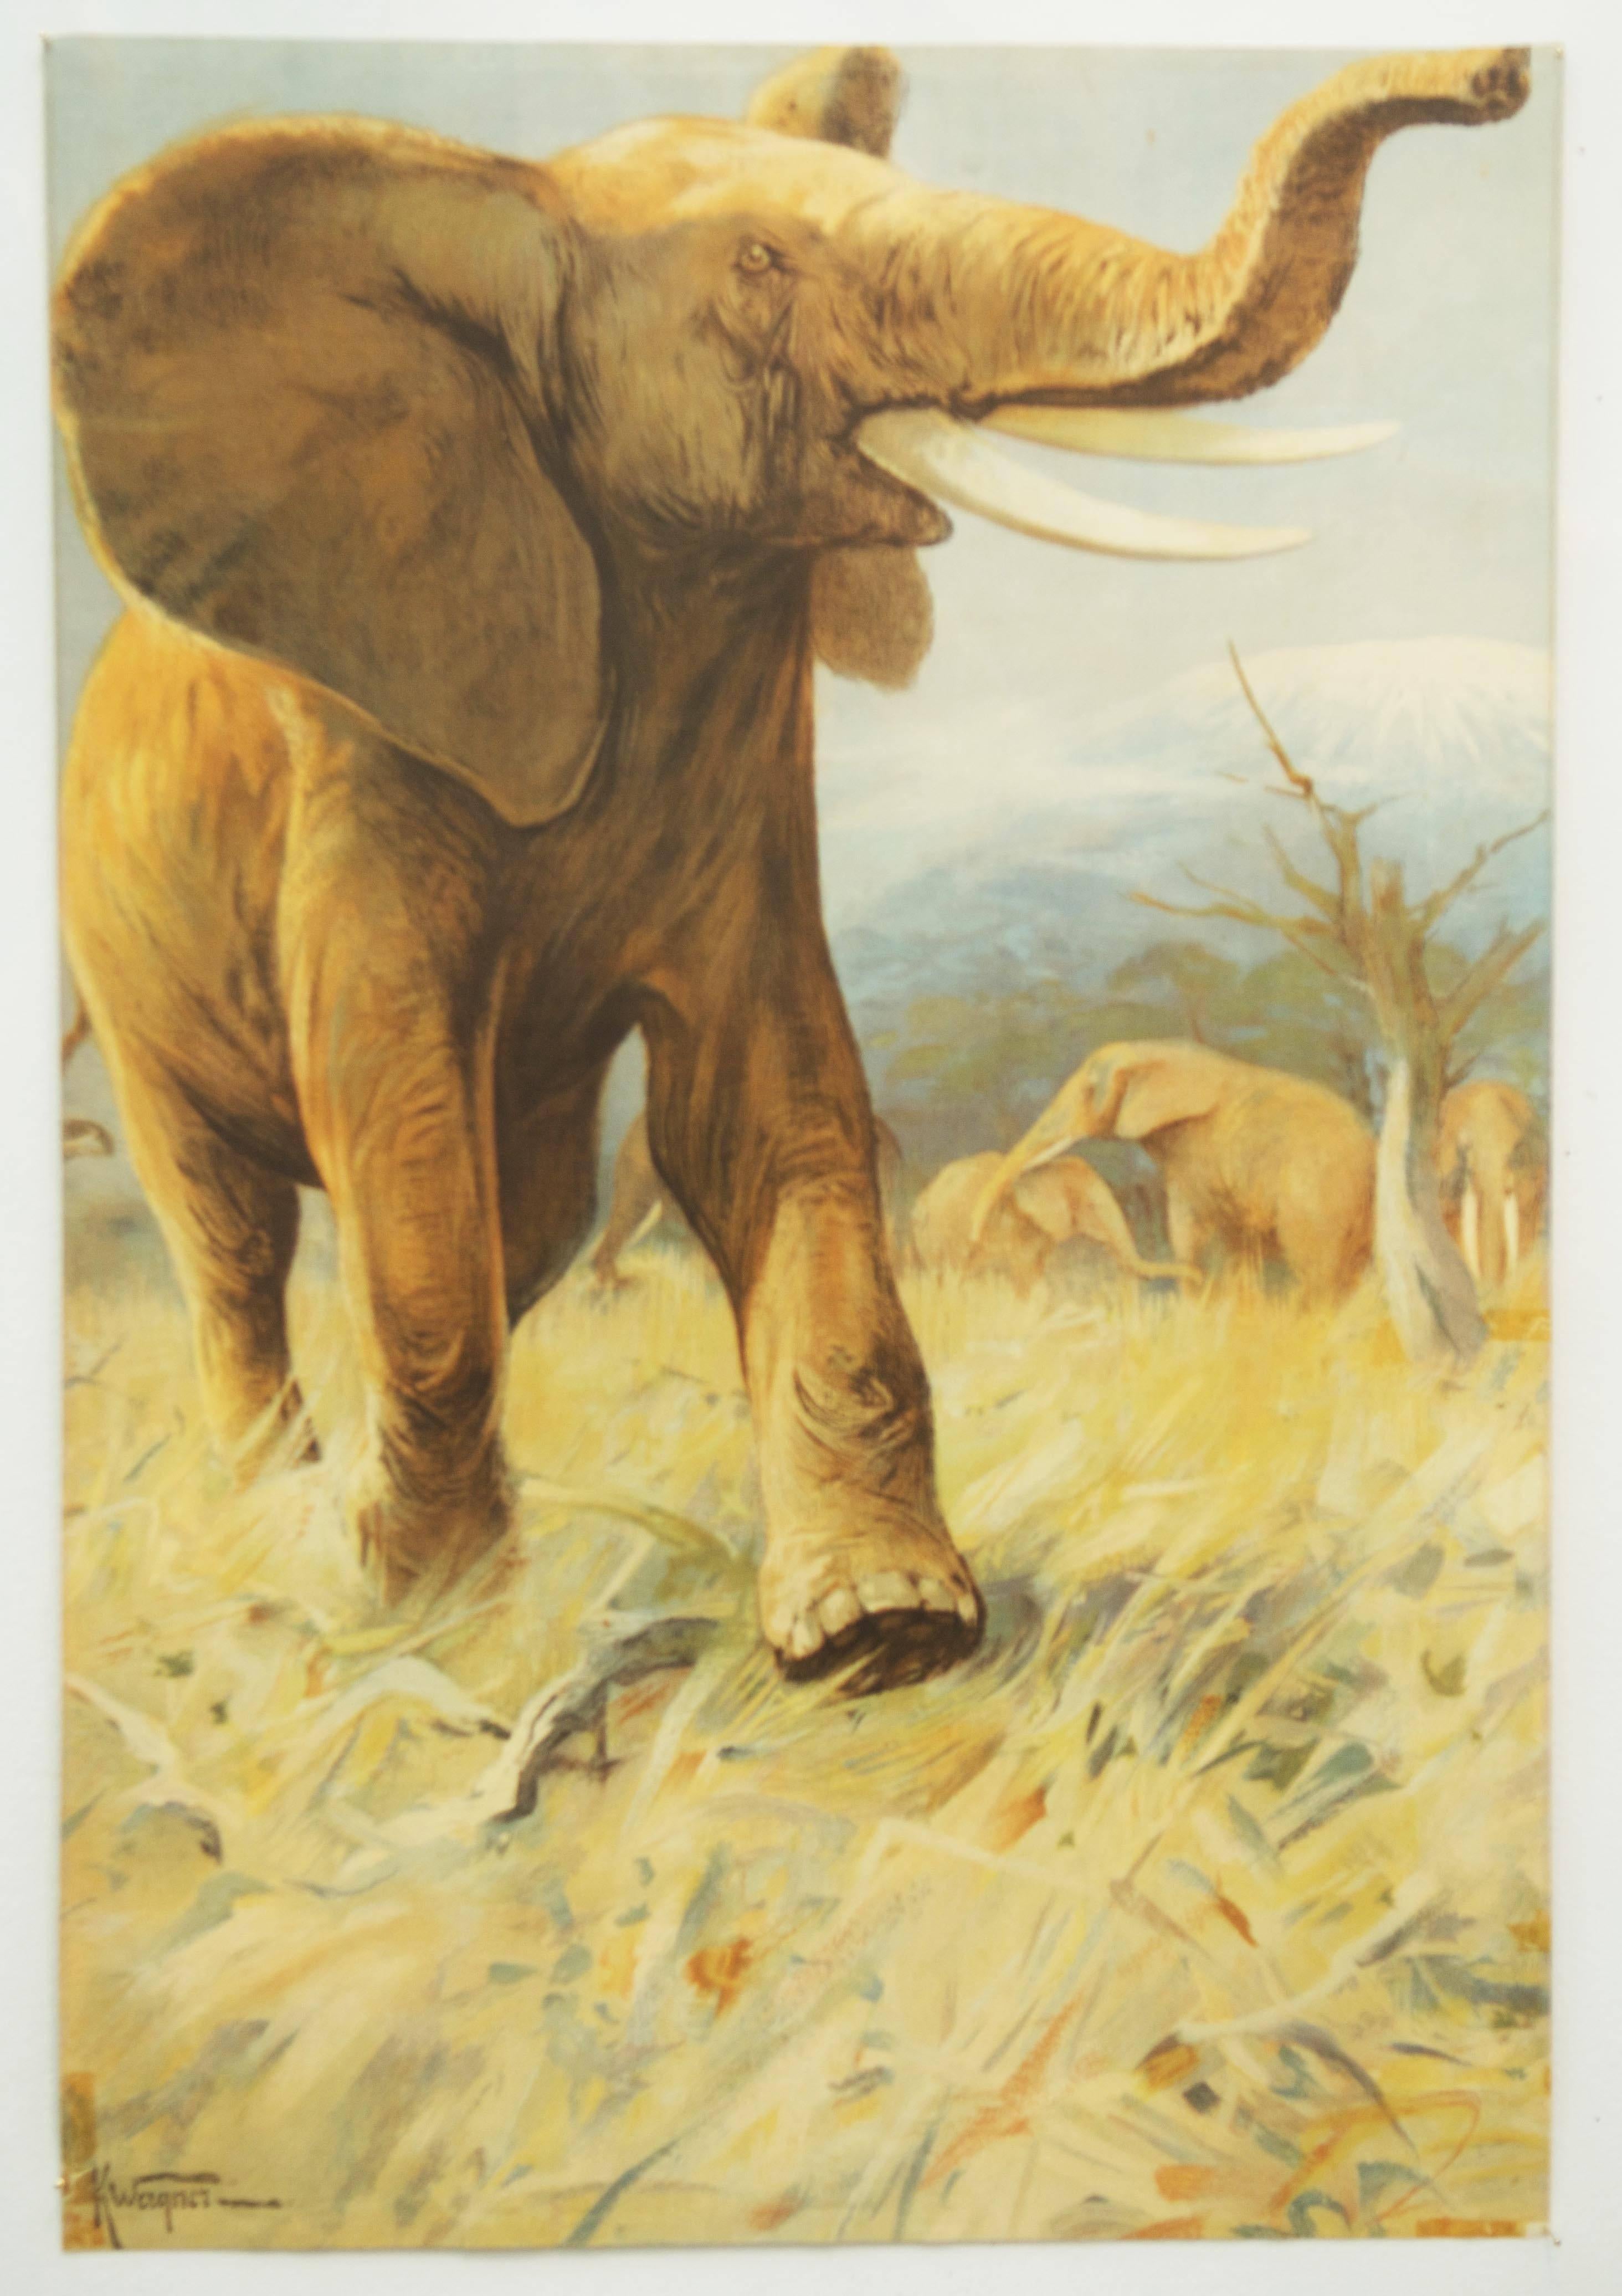 Antique wall chart depicting "elephants." The chart is signer K. Wagner.
Oringinaly painted in 1922. This is a reprint propably from the 1960s.
Colorful print on paper.
Good original condition, age-related traces of usage, partly